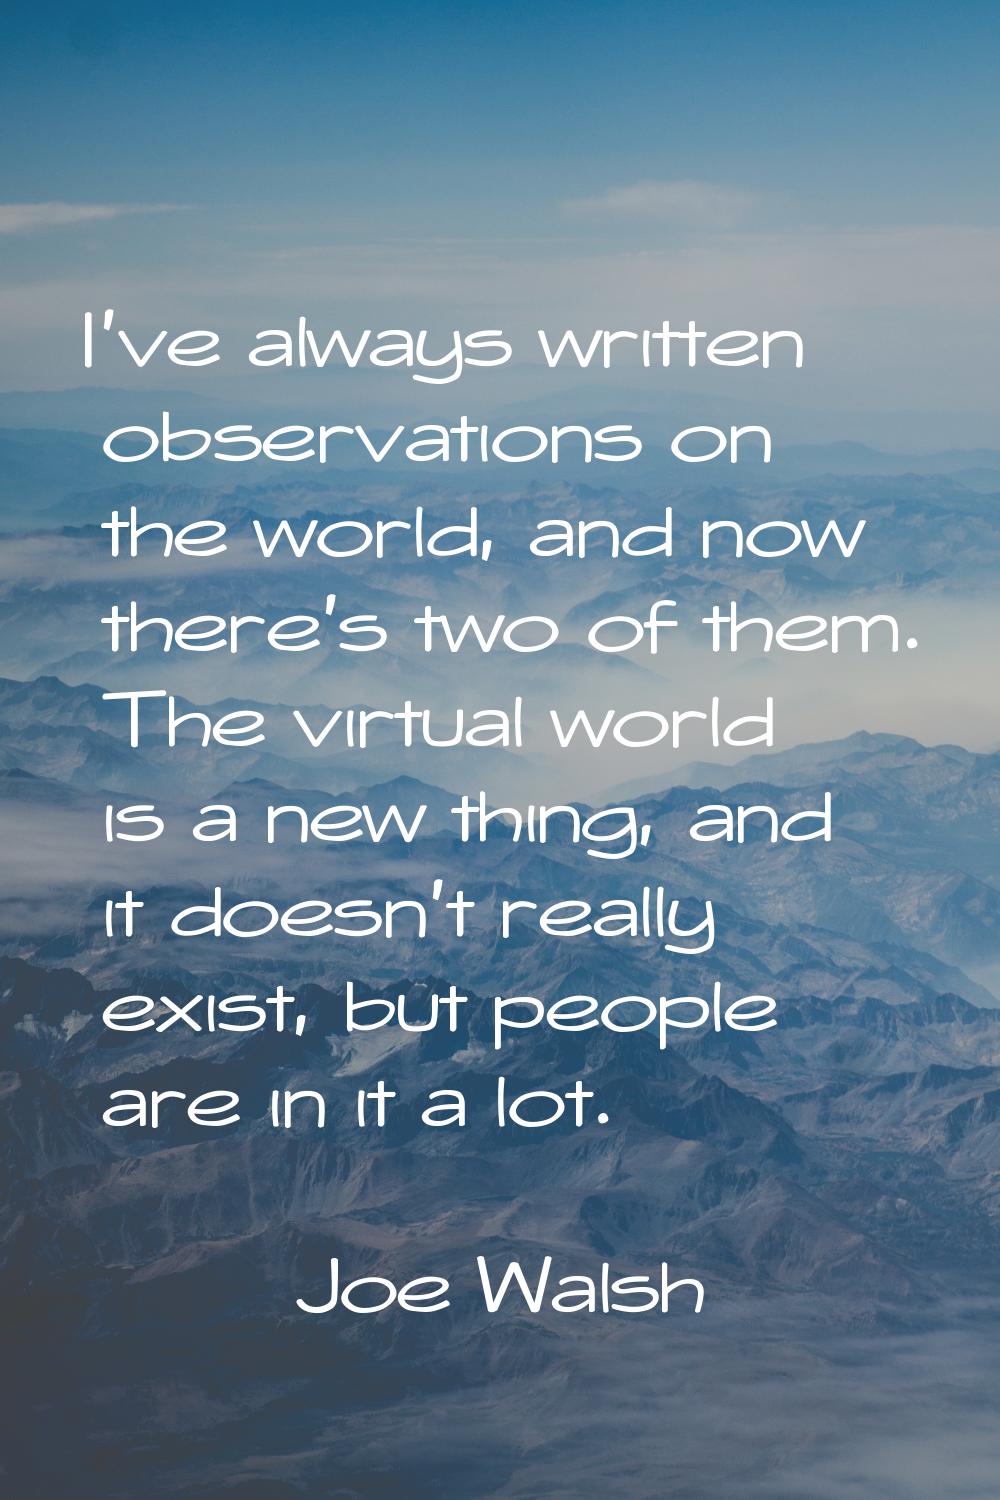 I've always written observations on the world, and now there's two of them. The virtual world is a 